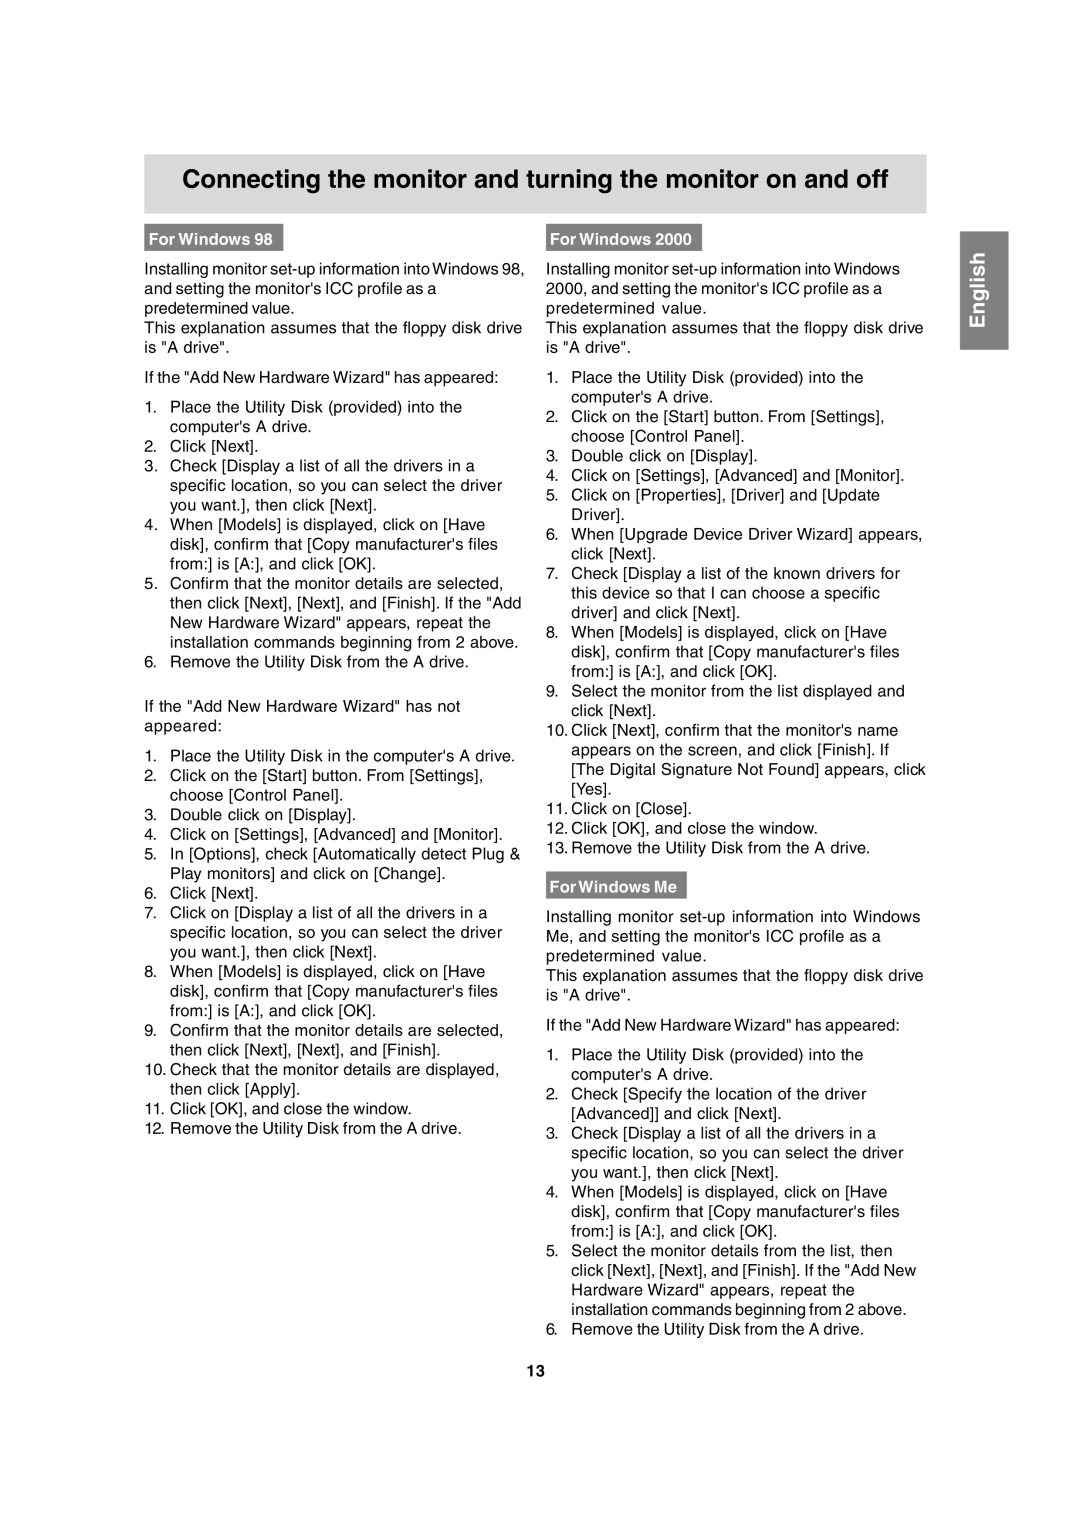 Sharp LL-T15A4 operation manual For Windows Me, Connecting the monitor and turning the monitor on and off, English 